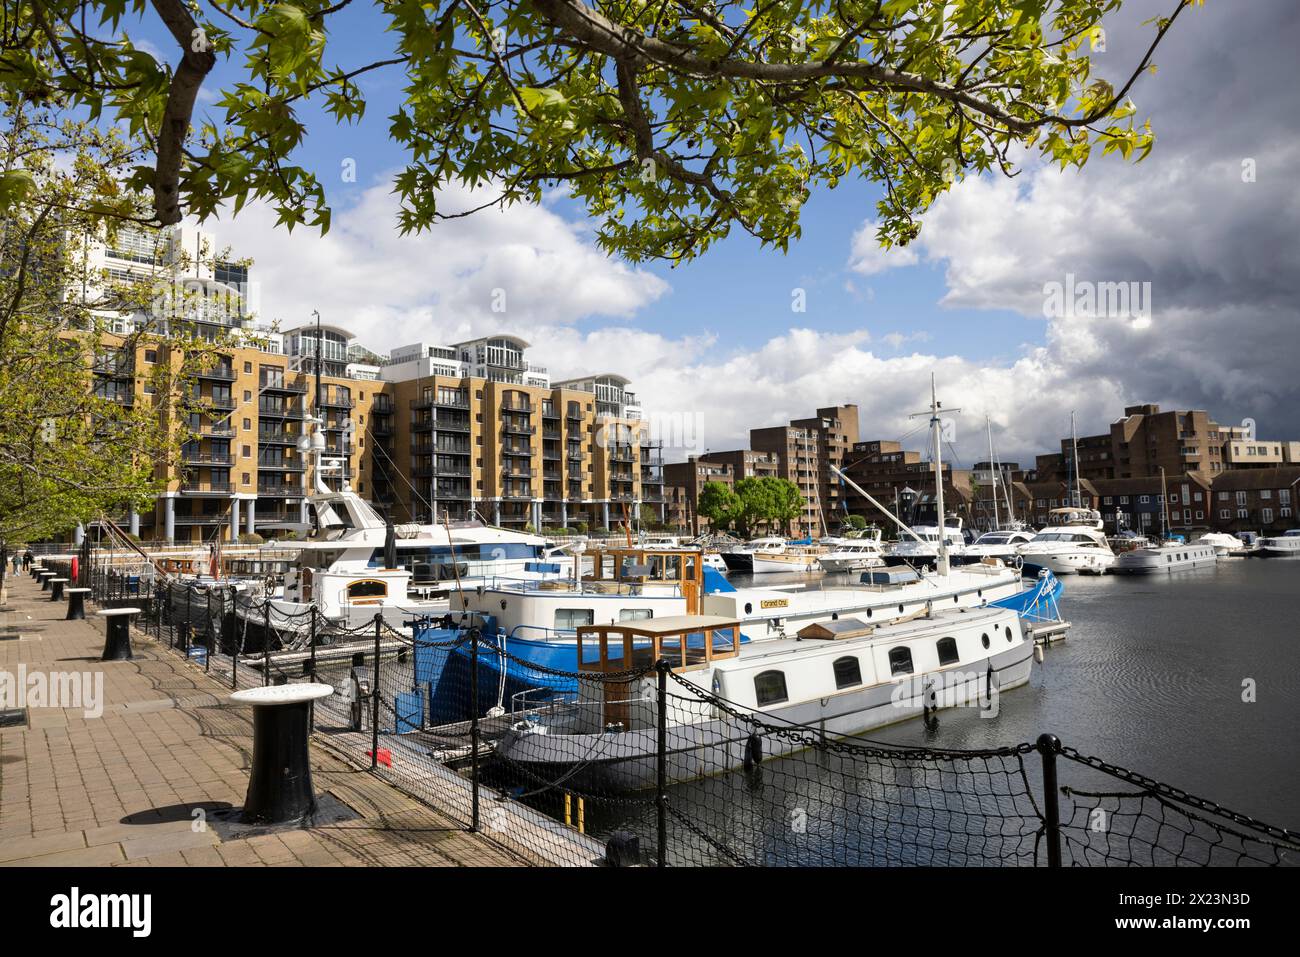 St Katharine Docks, former docks lying in the East End of London Borough of Tower Hamlets, now a community of luxury apartments including restaurants. Stock Photo